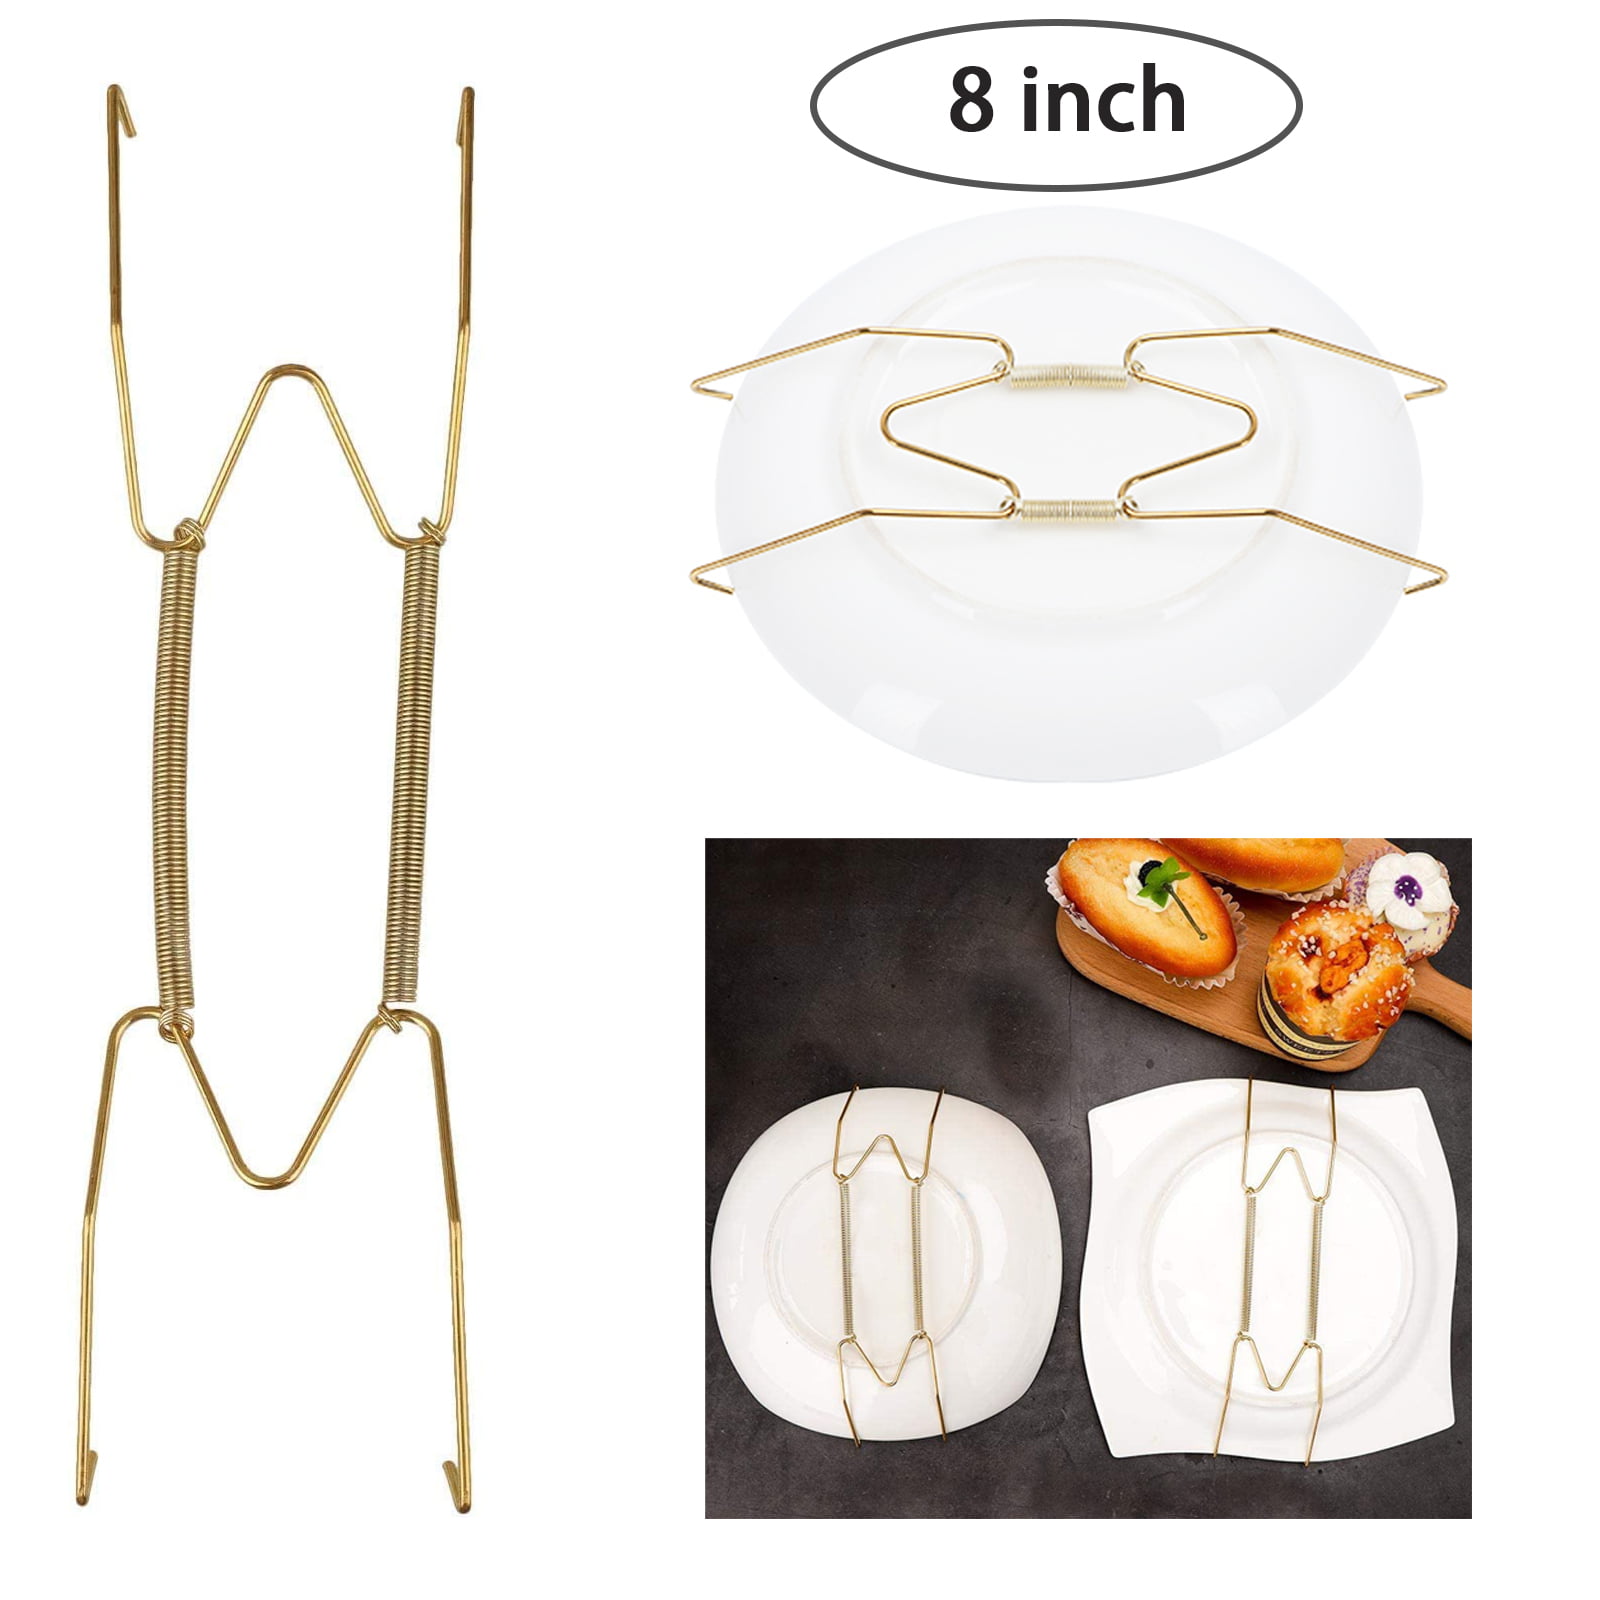 8 10 12 14 16Inch Wall Display Plate Dish Hangers Holder for Home Decor Practical Wall Plate Hangers Golden with Stainless Steel Decorative Dish Display Platter Holder 12inch